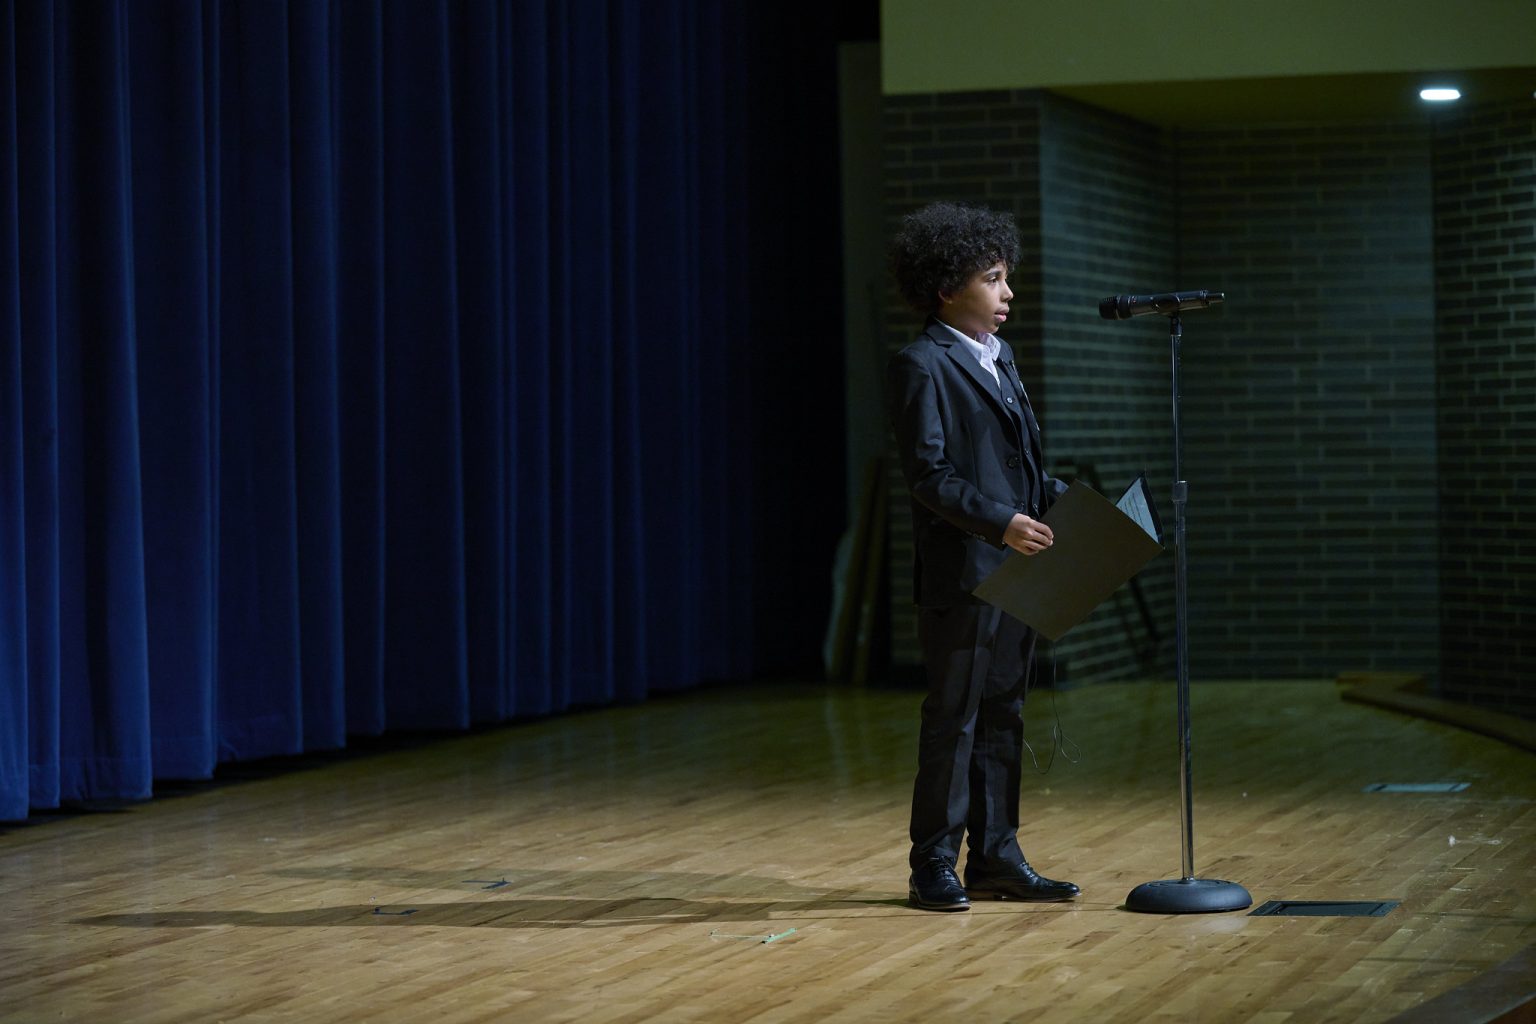 Eight Dallas ISD students will compete in annual MLK Jr. Oratory Competition